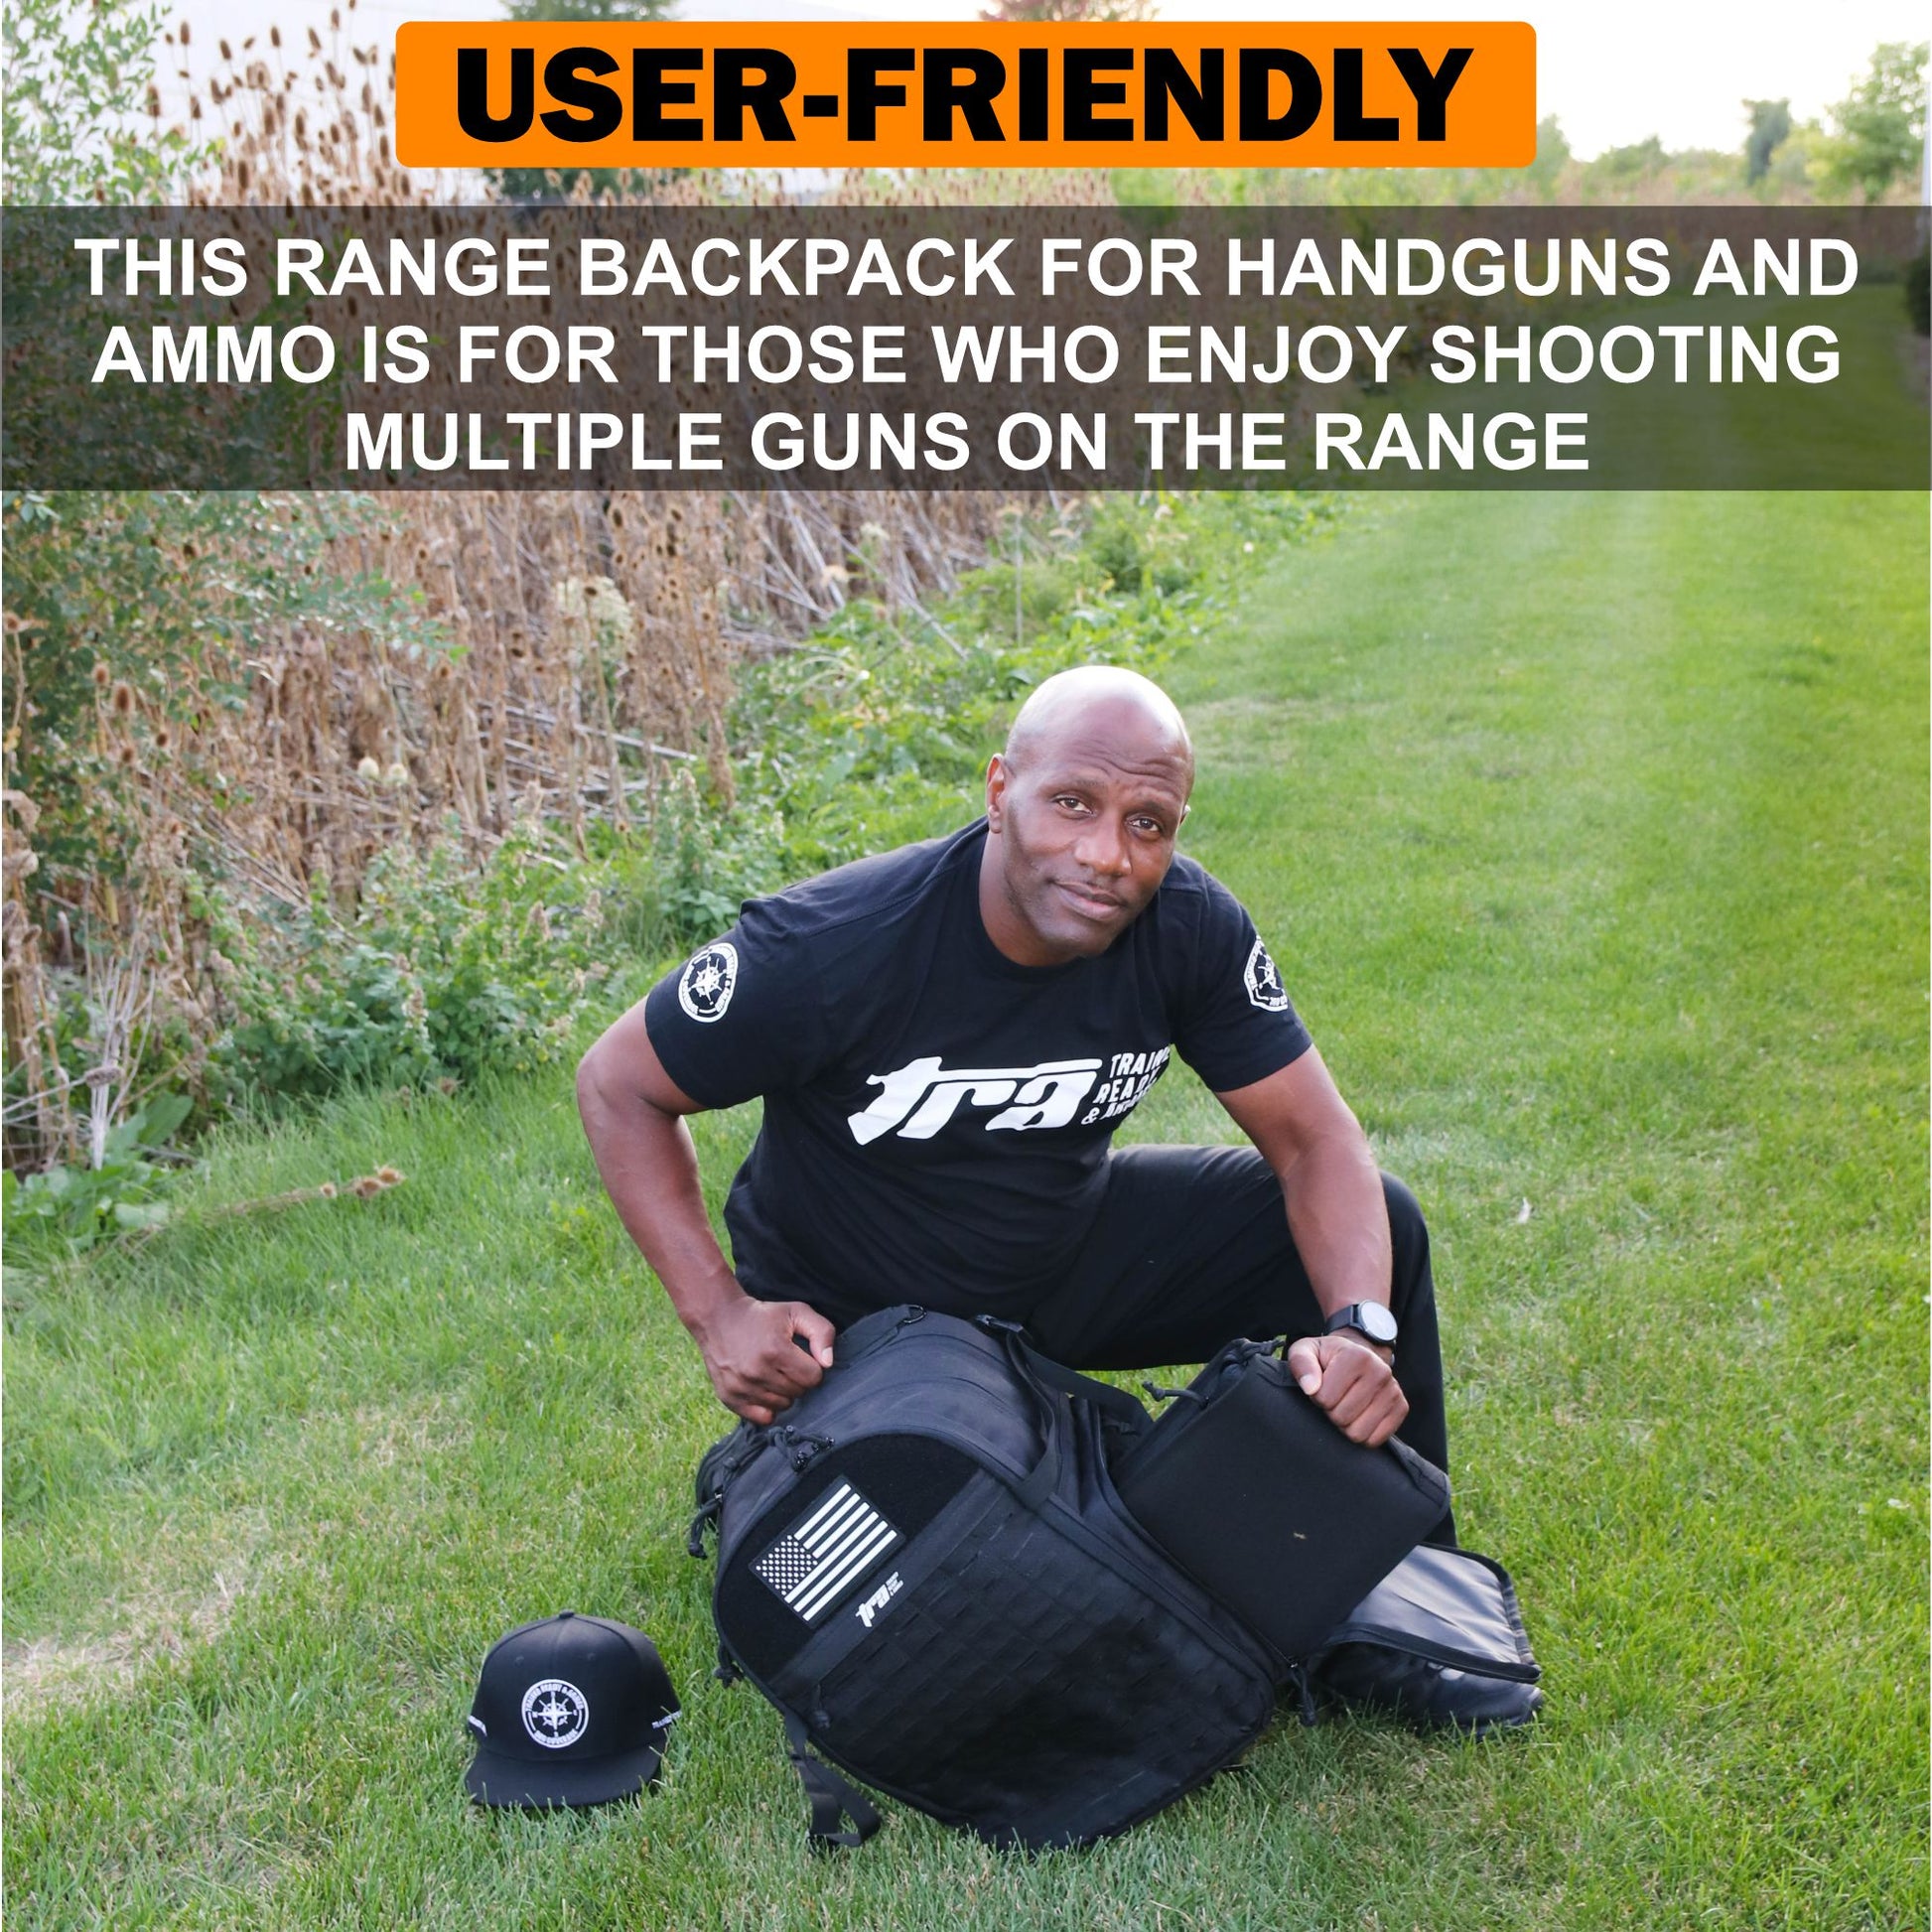 Trained Ready & Armed Tactical Range Bag - Trained Ready Armed Apparel